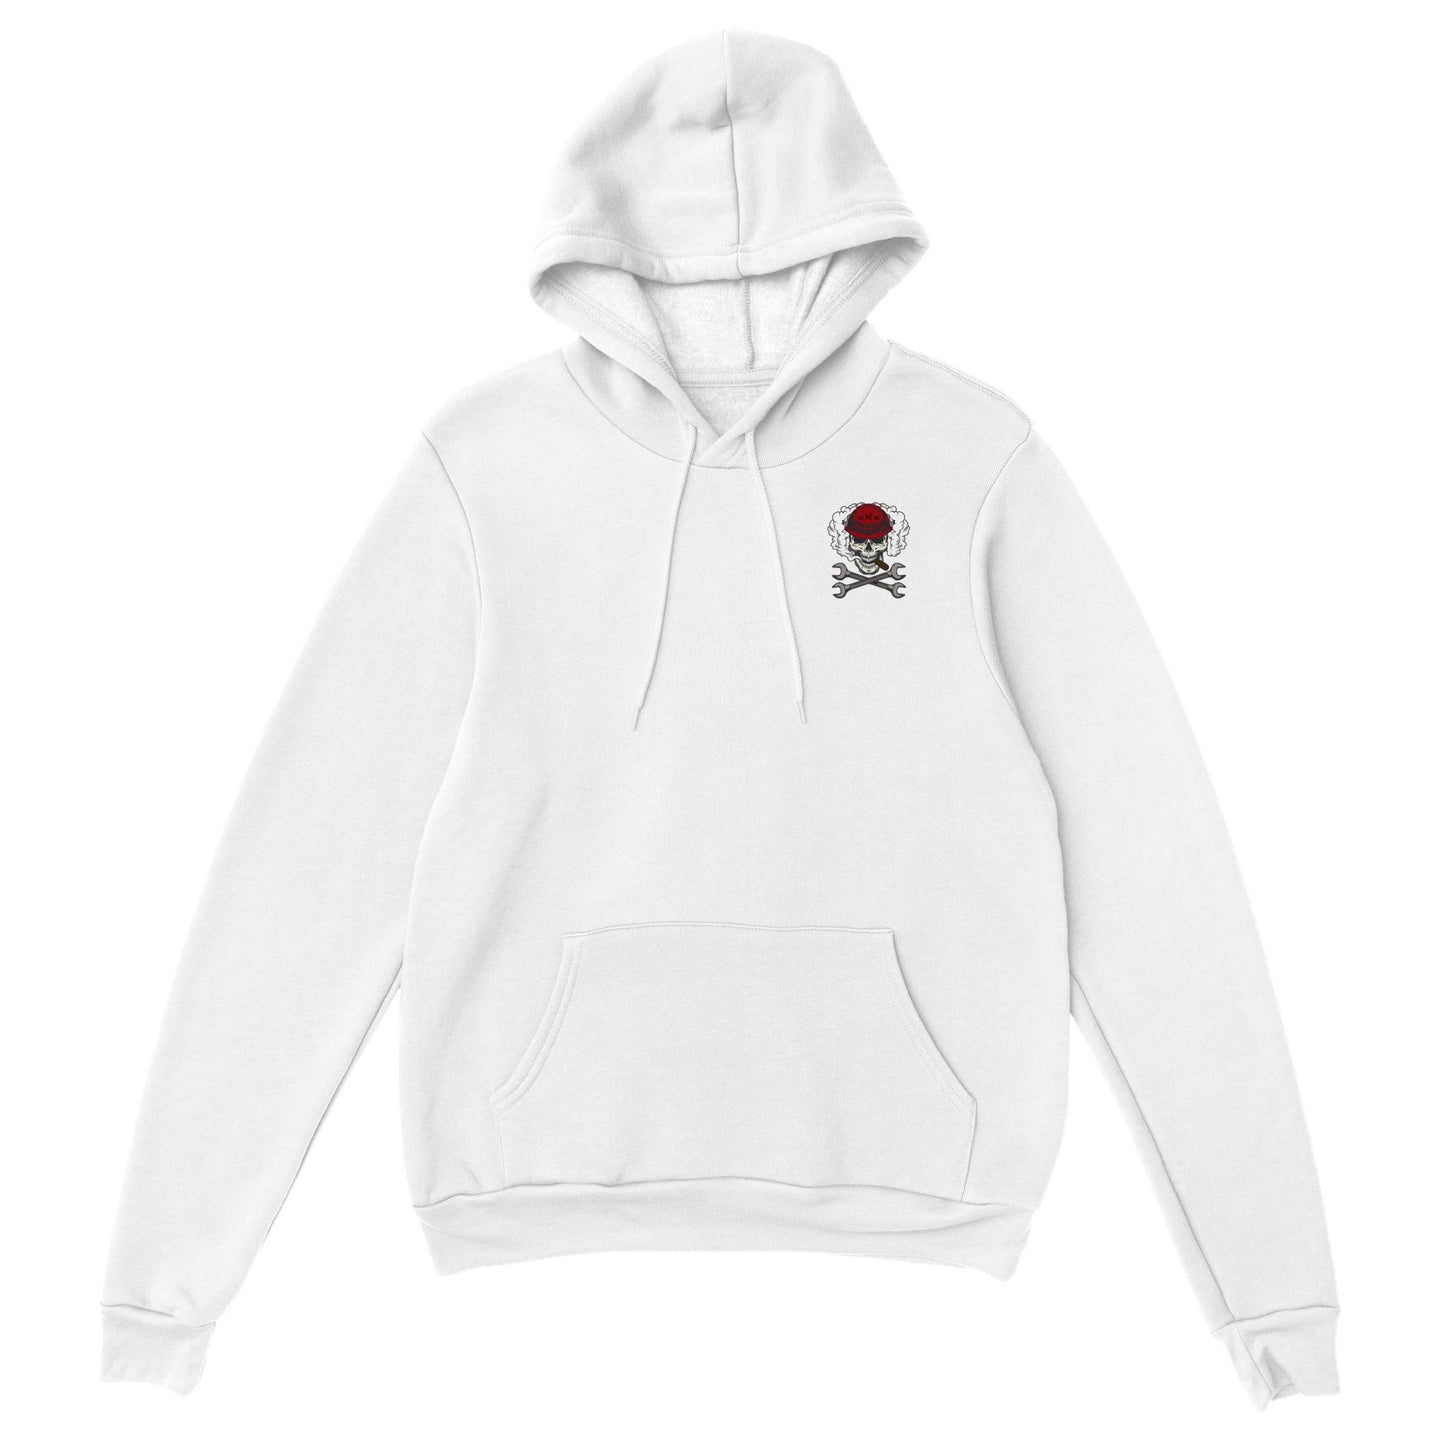 MMM Hoodie: First edition Red - Premium